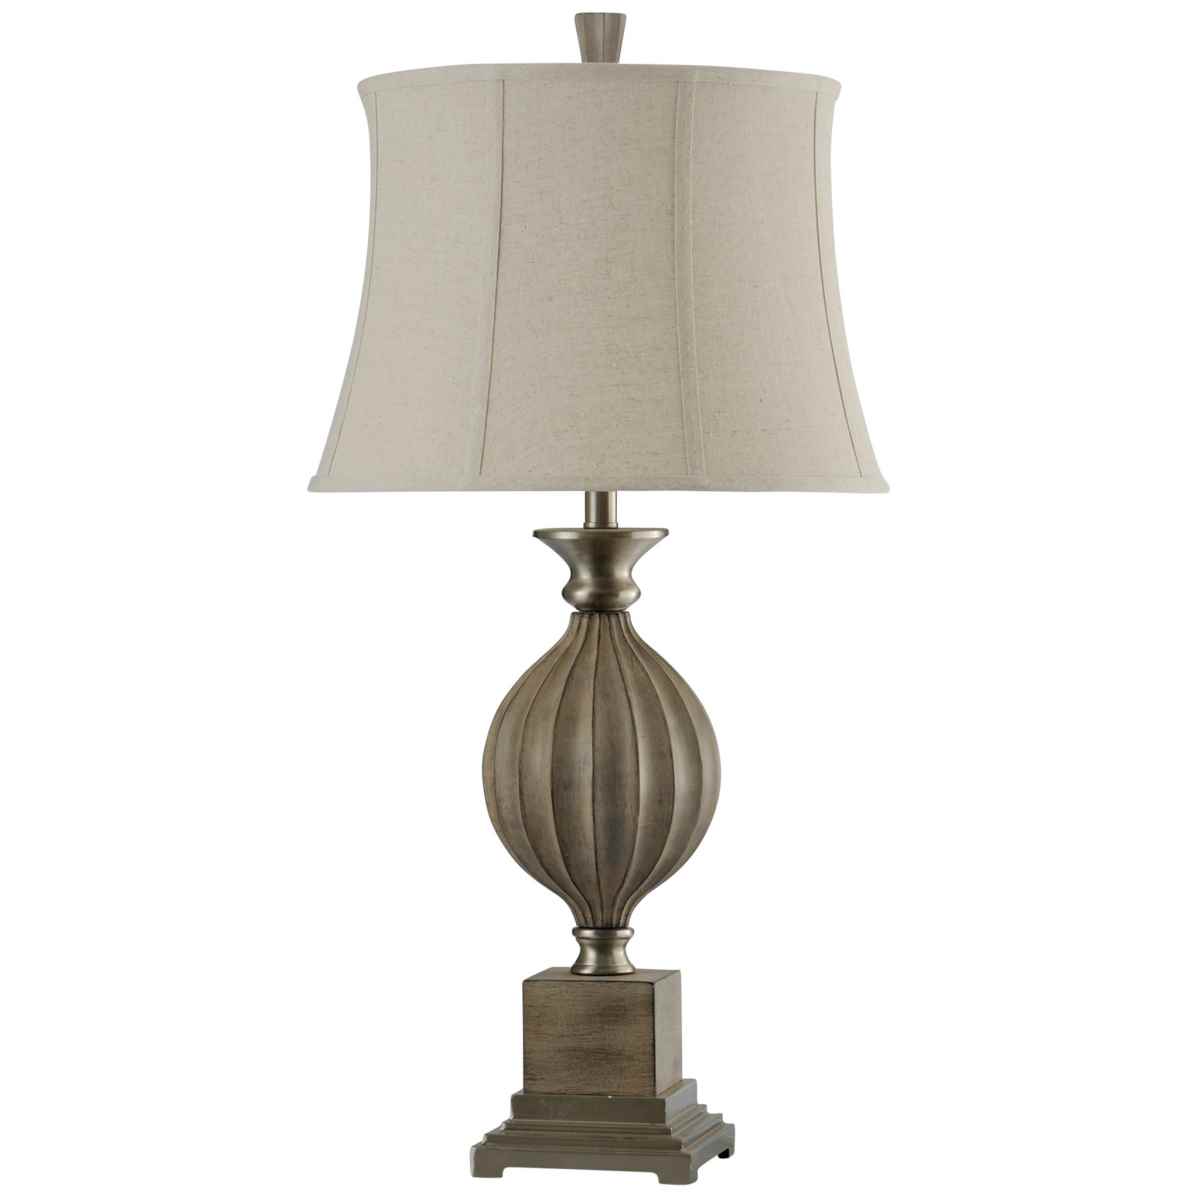 Style Craft Norcross Table Lamp